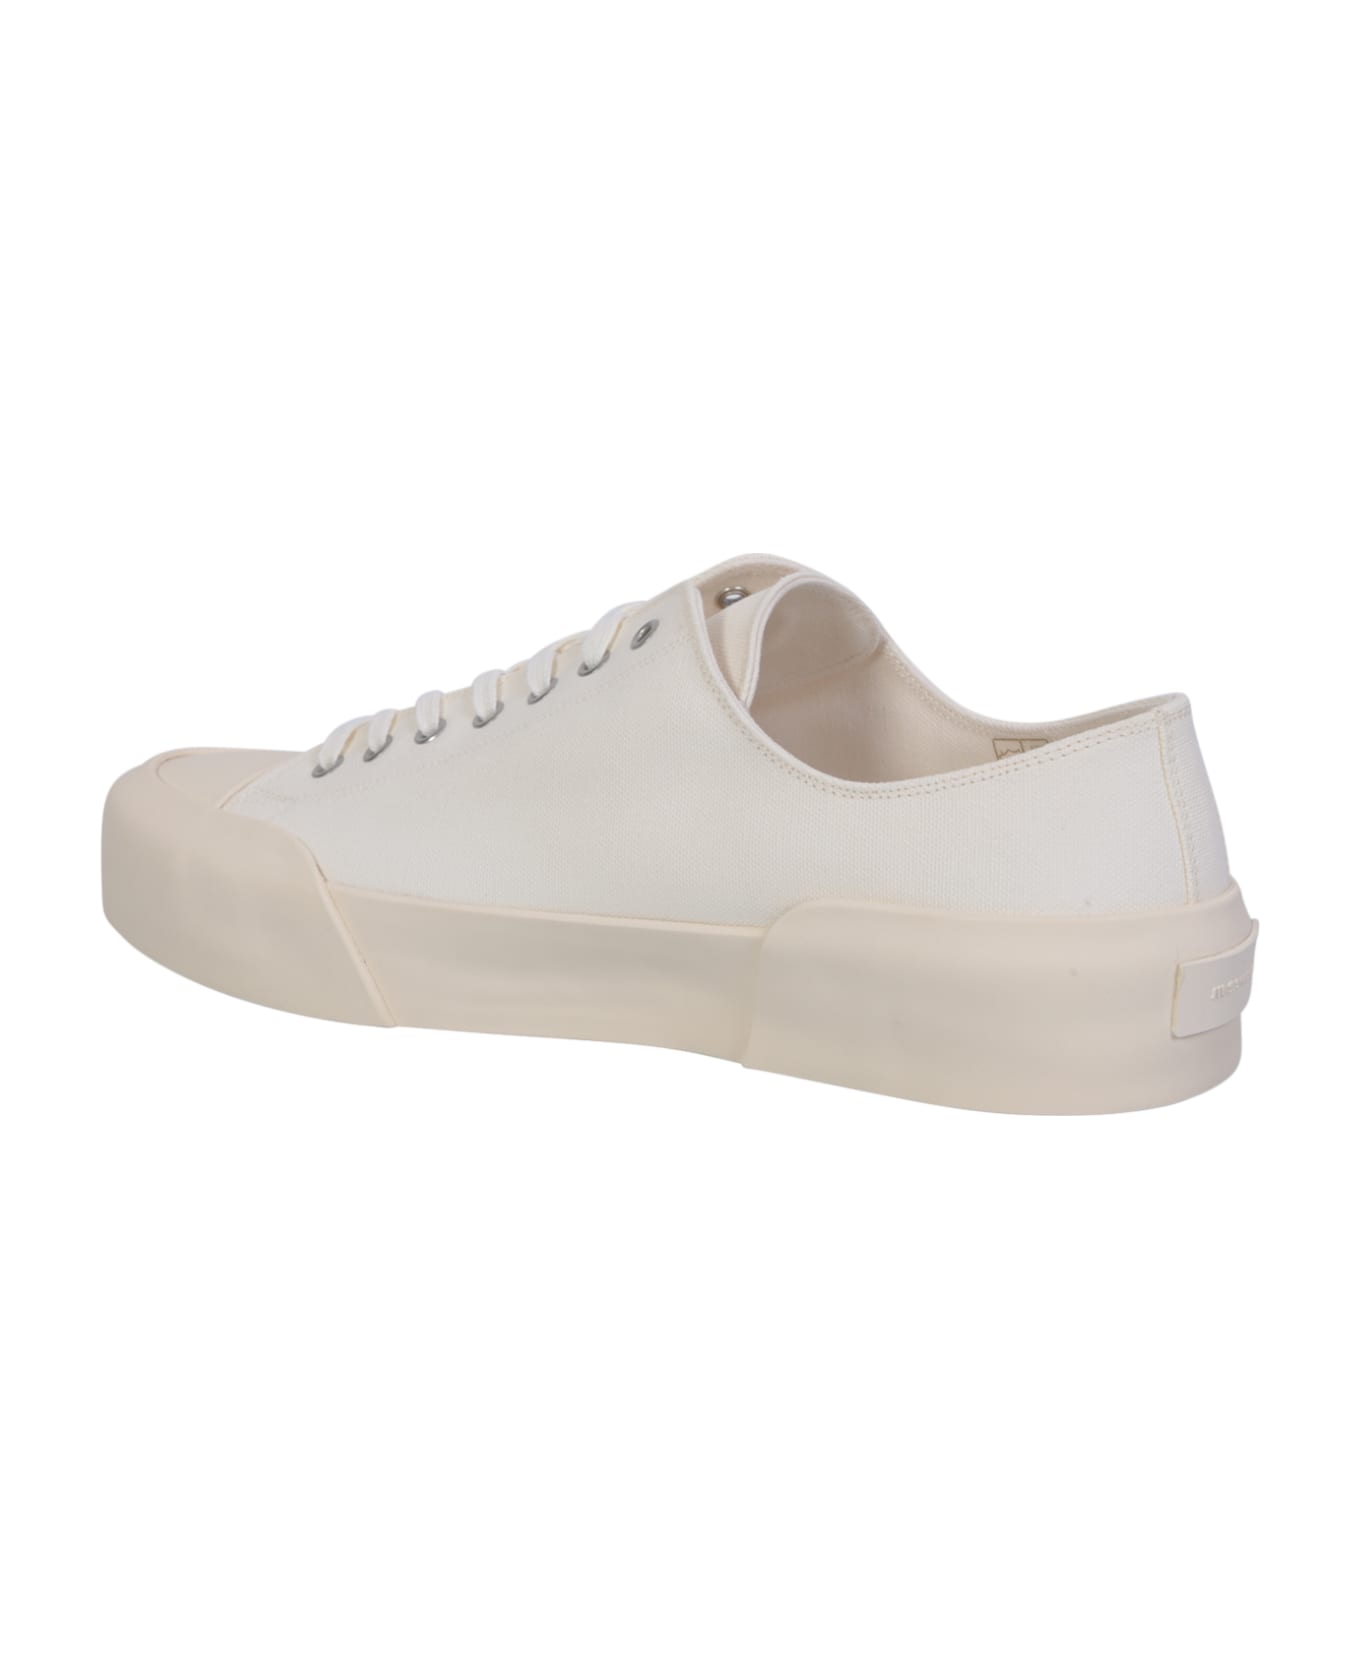 Jil Sander White Lace-up Low Top Sneakers - NATURAL